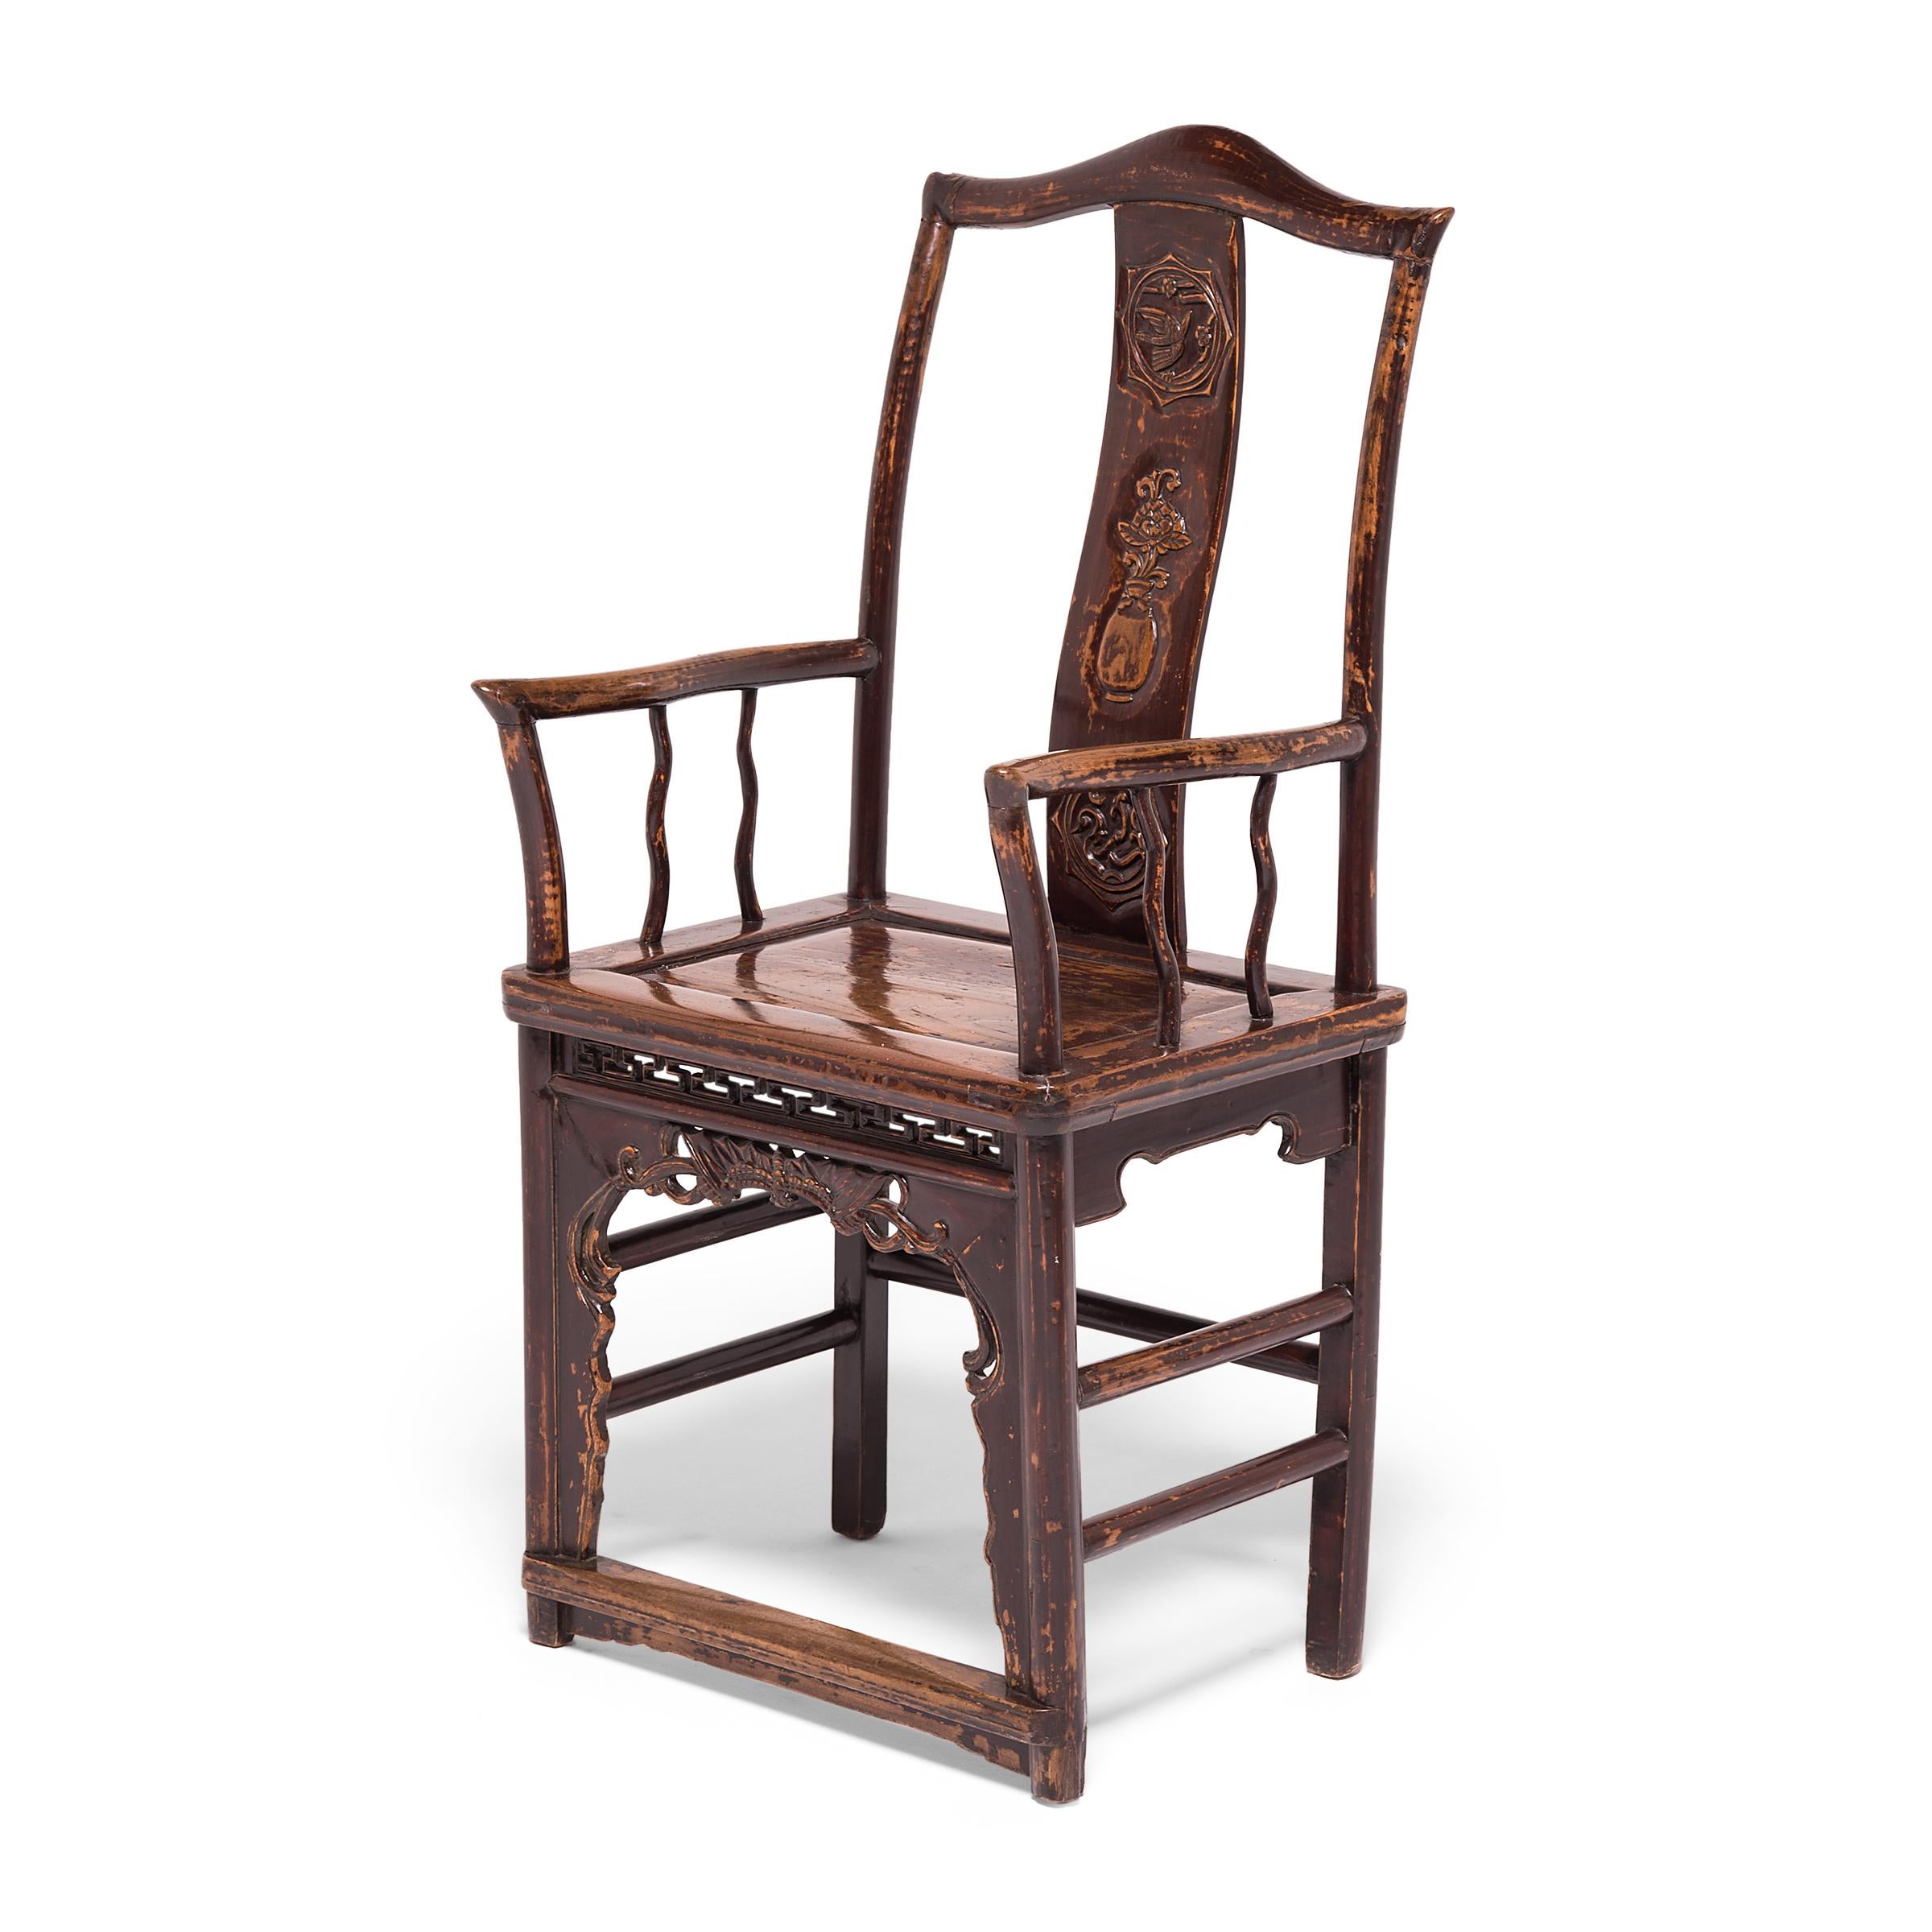 Pair of Chinese Southern Administrator's Chairs, c. 1850 For Sale 2